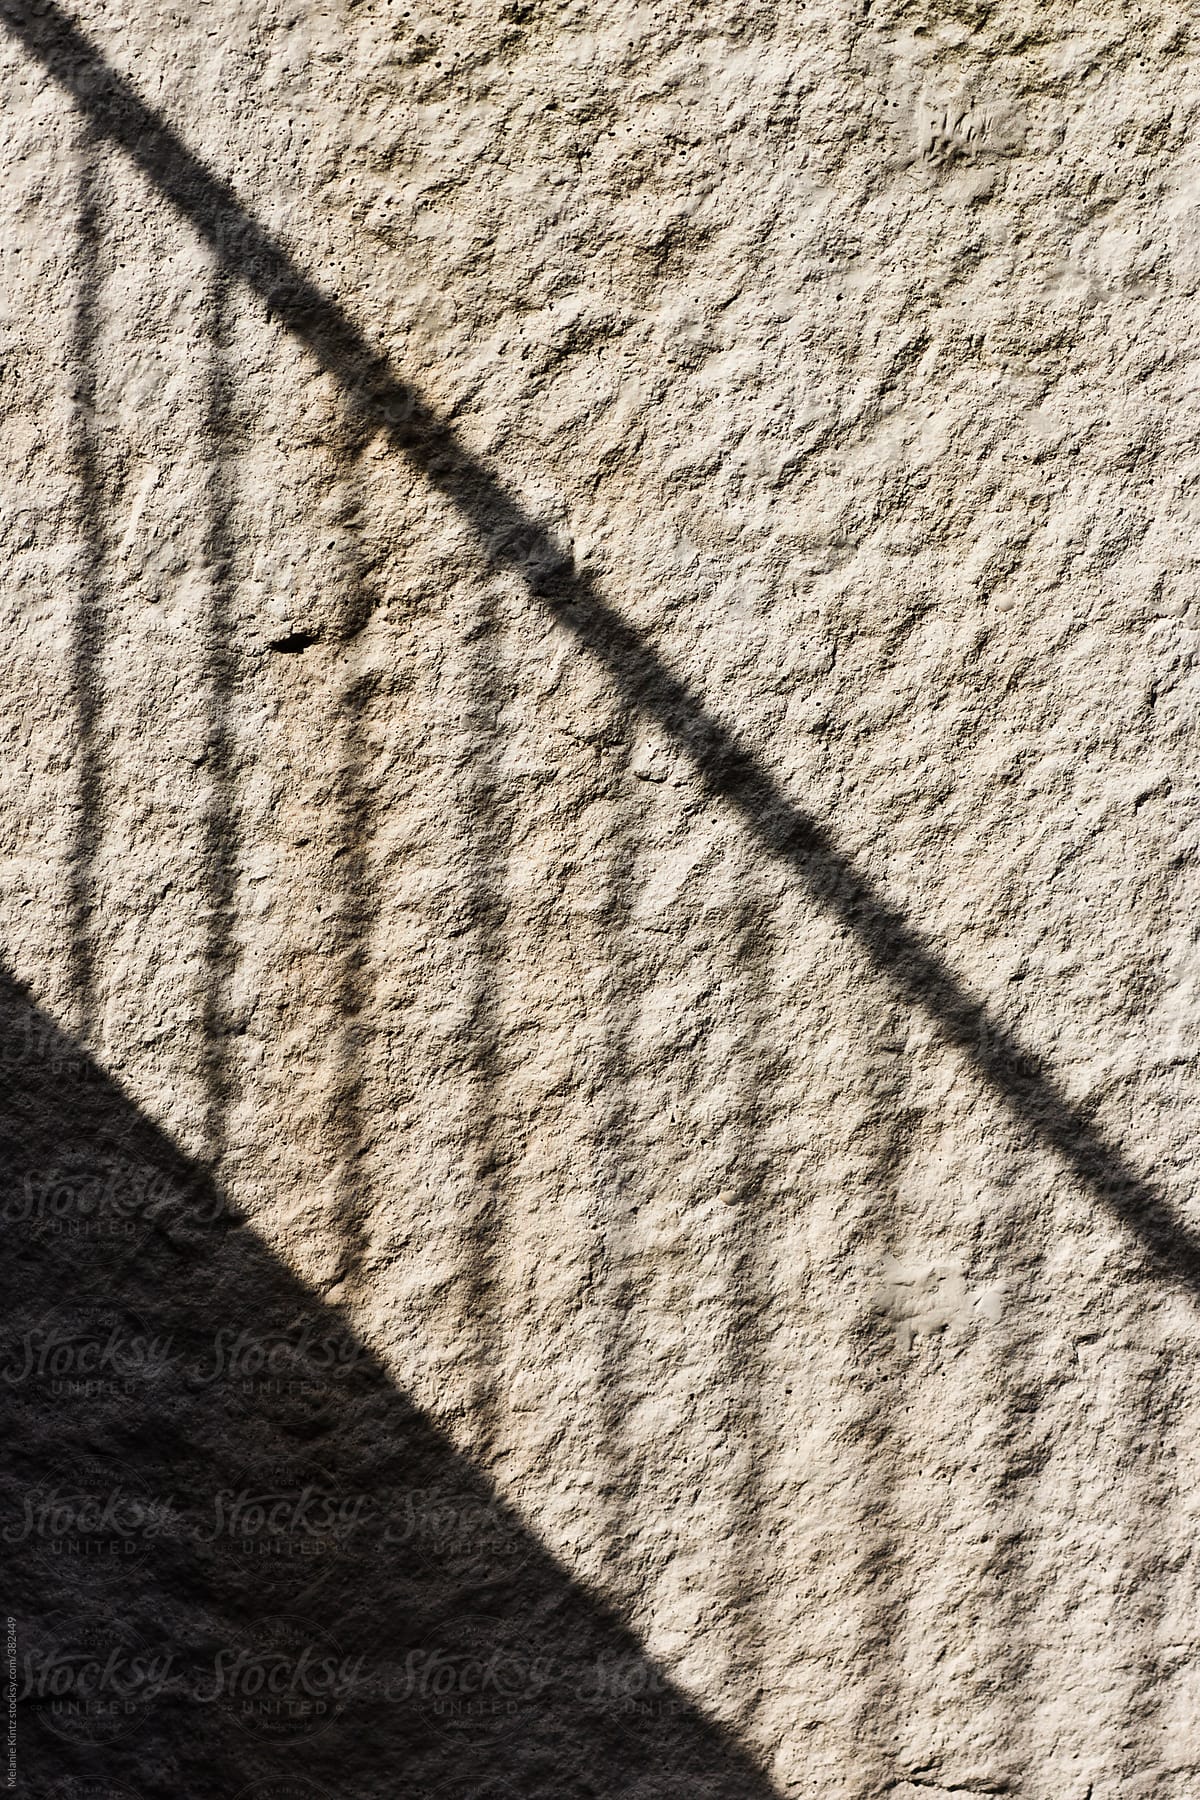 Shadow of a railing on a wall